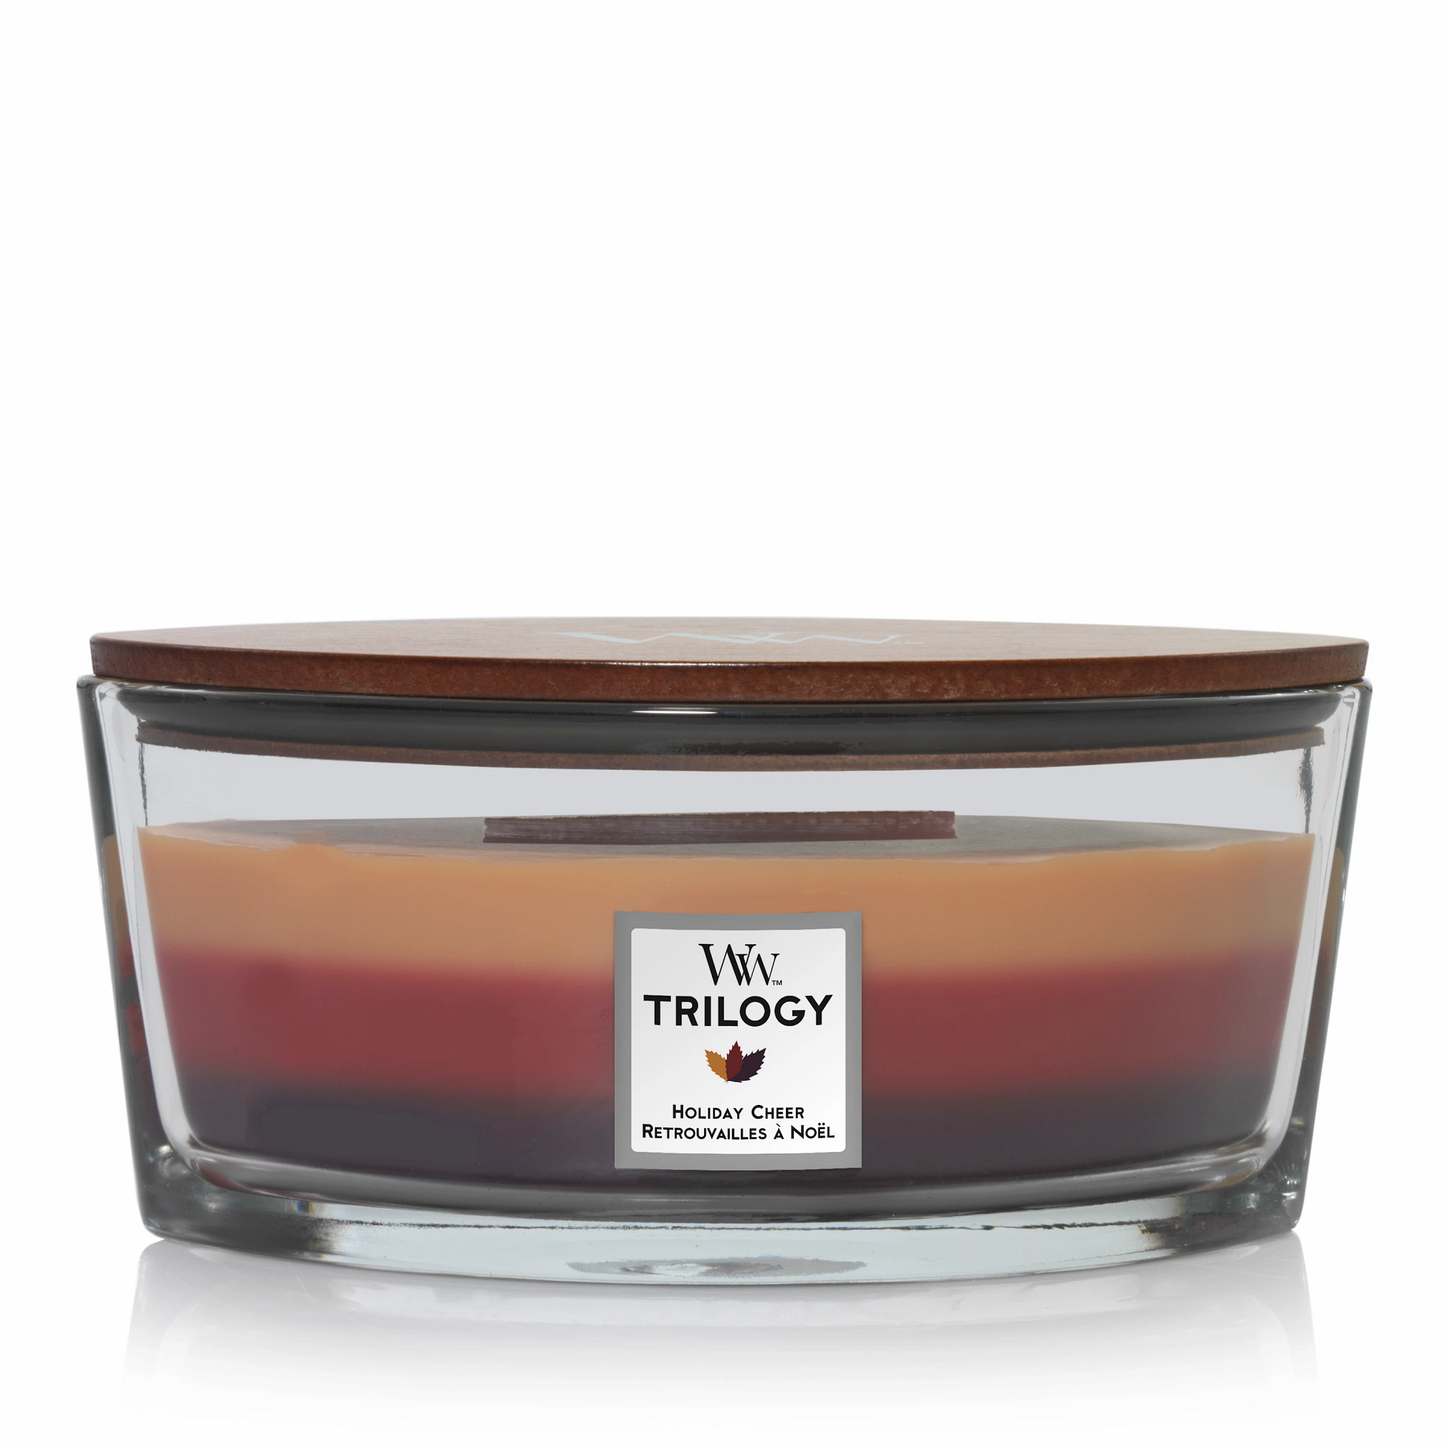 Woodwick - Candela Ellipse Trilogy Holiday Cheer